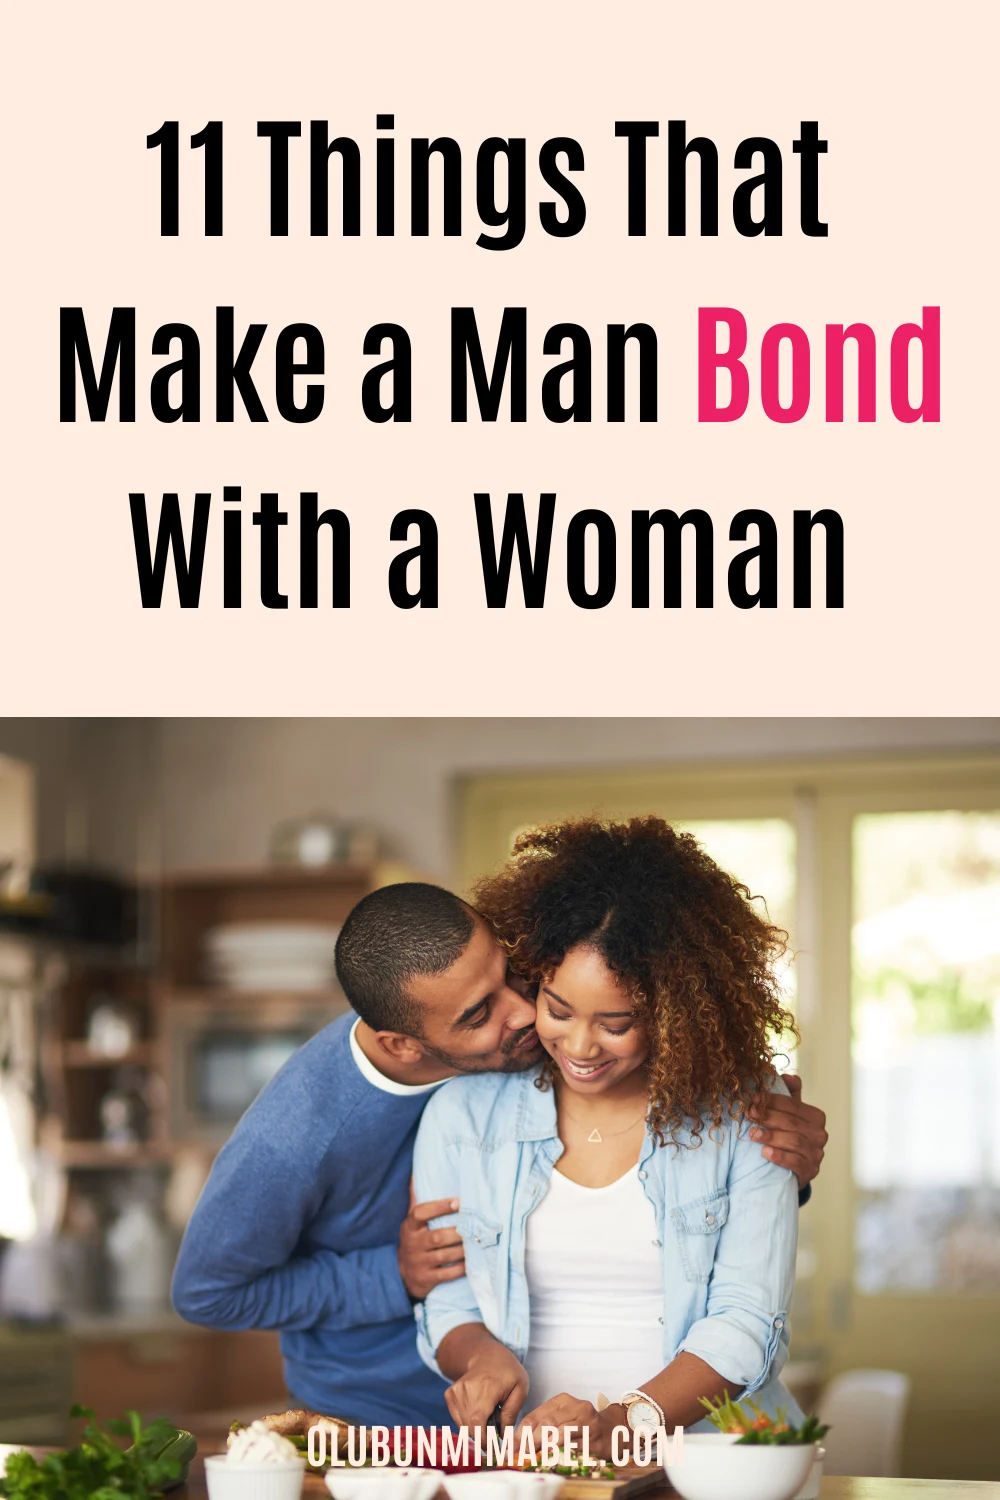 What Causes a Man To Bond With a Woman